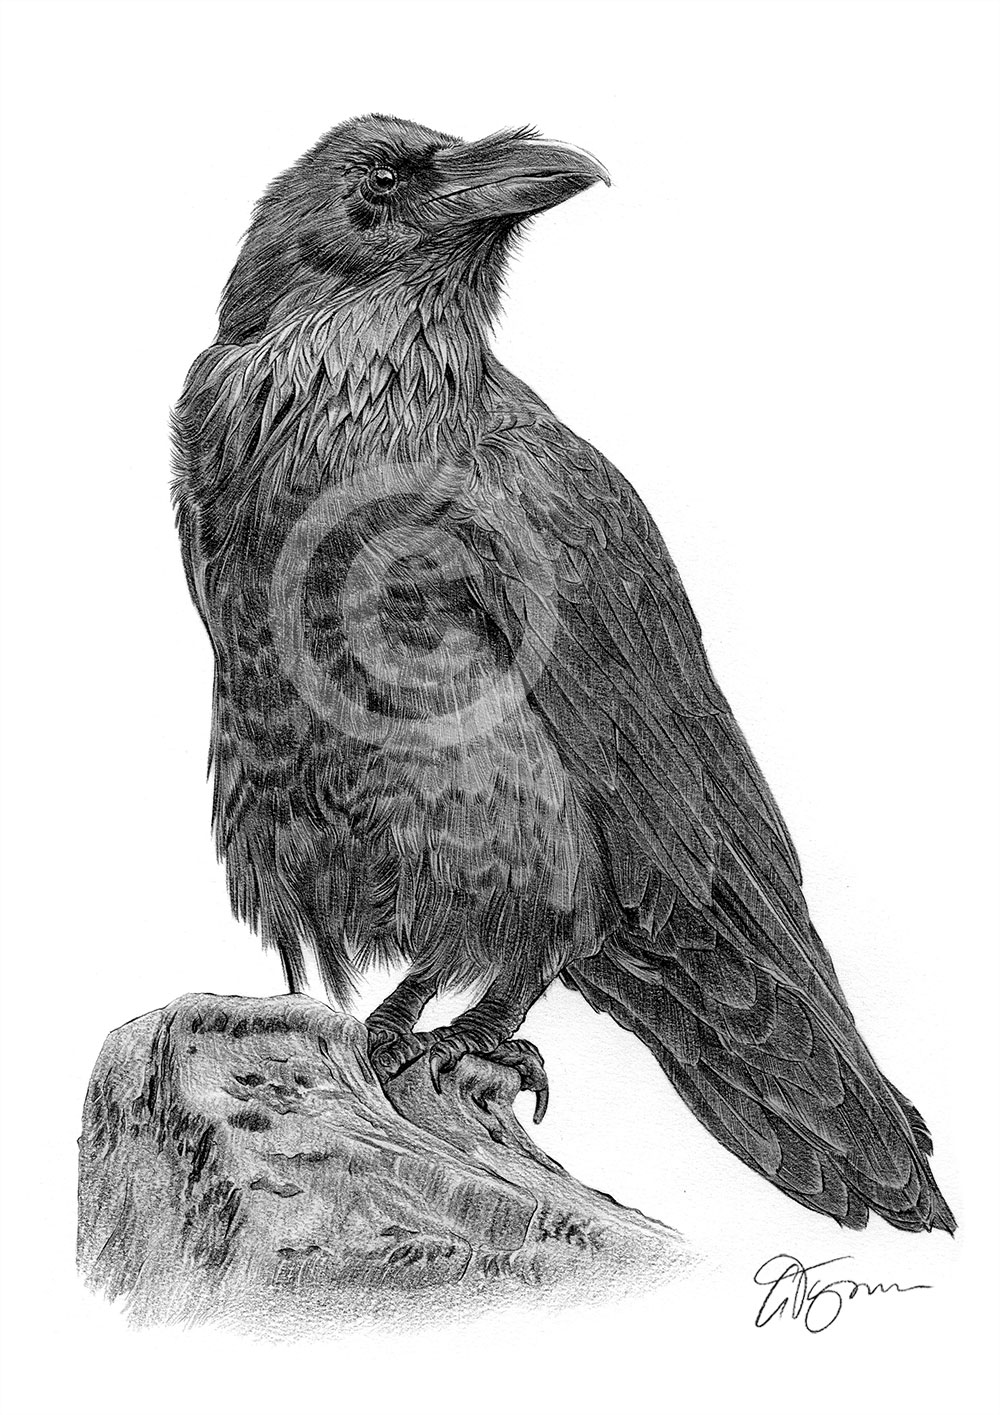 Pencil drawing of a raven by UK artist Gary Tymon